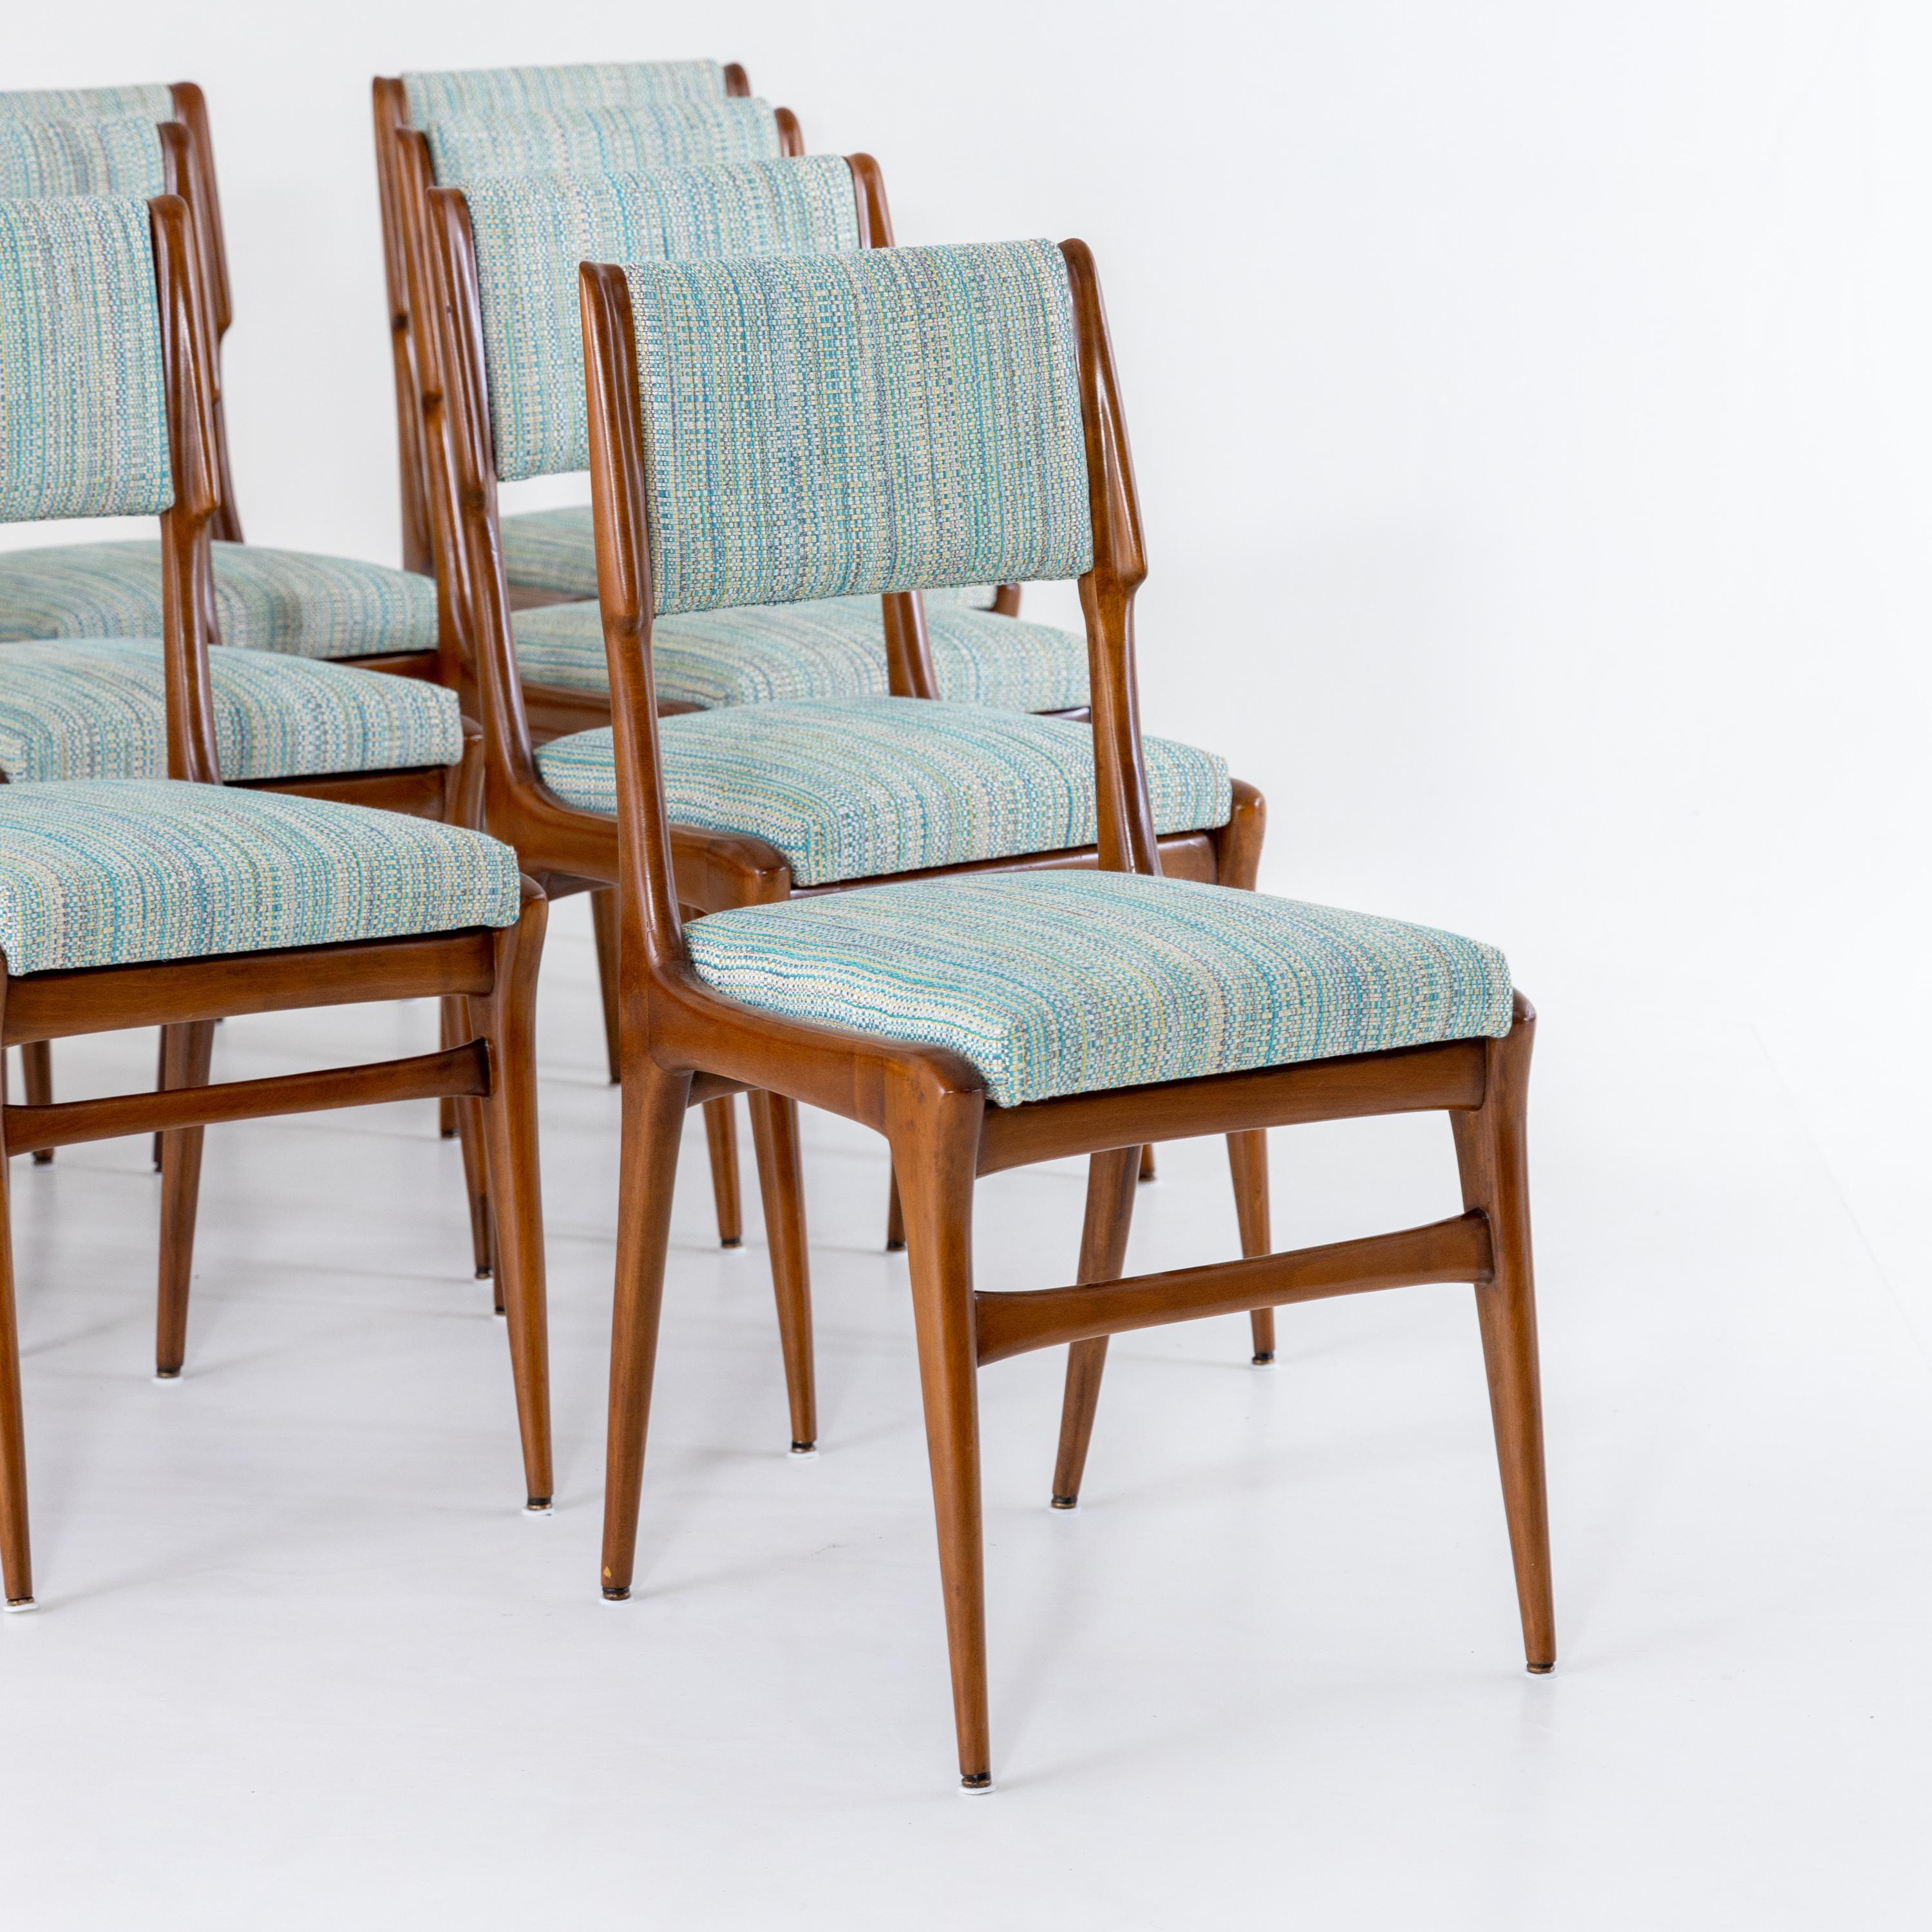 Wood Dining Room Chairs, Italy Mid-20th Century